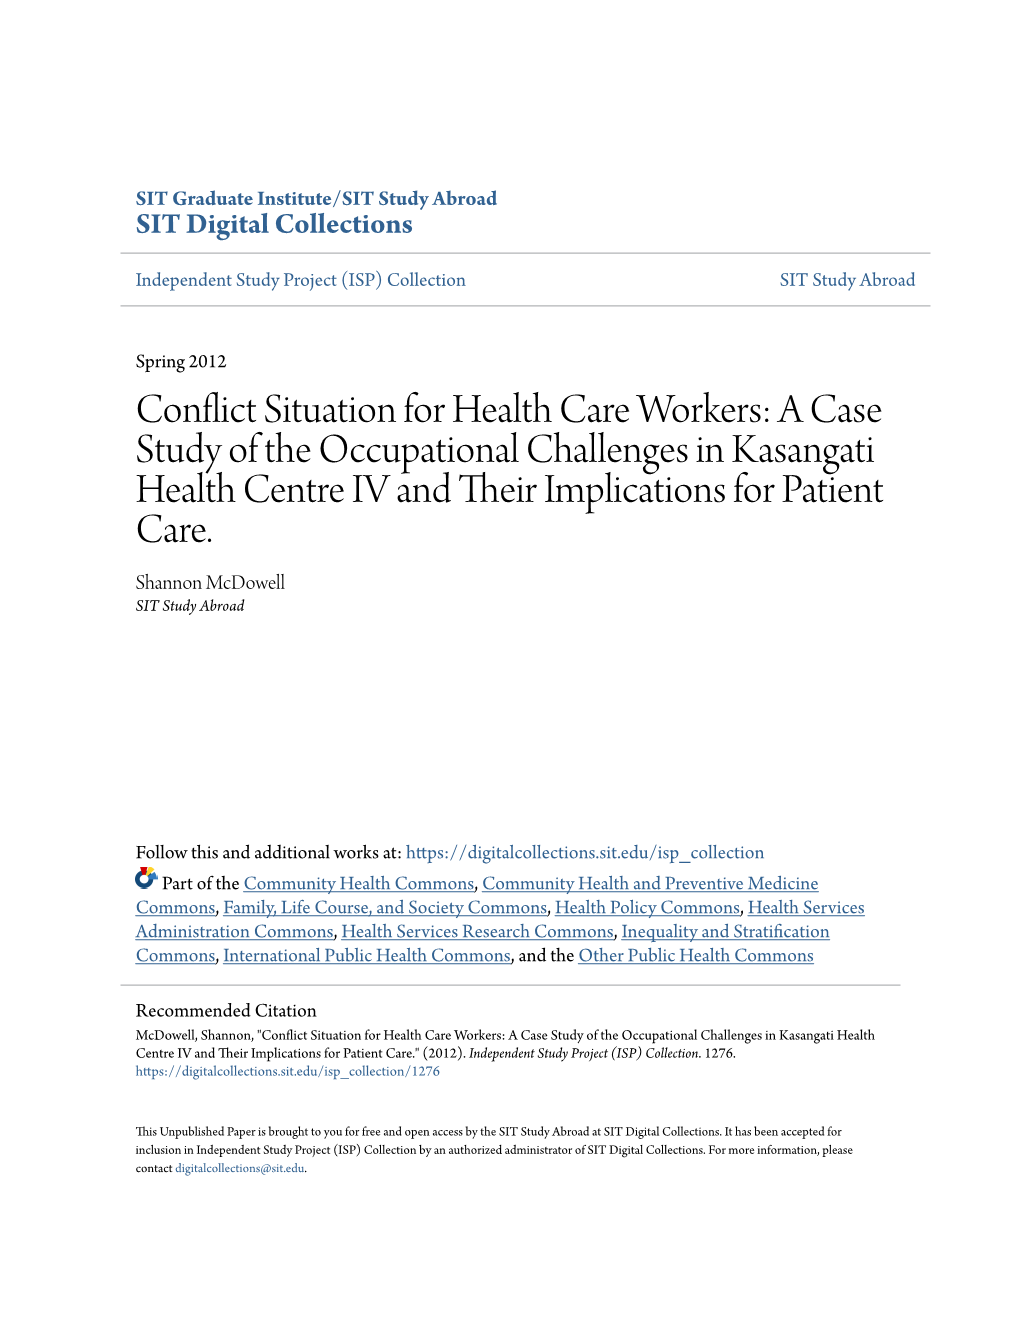 Conflict Situation for Health Care Workers: a Case Study of the Occupational Challenges in Kasangati Health Centre IV and Their Mplici Ations for Patient Care